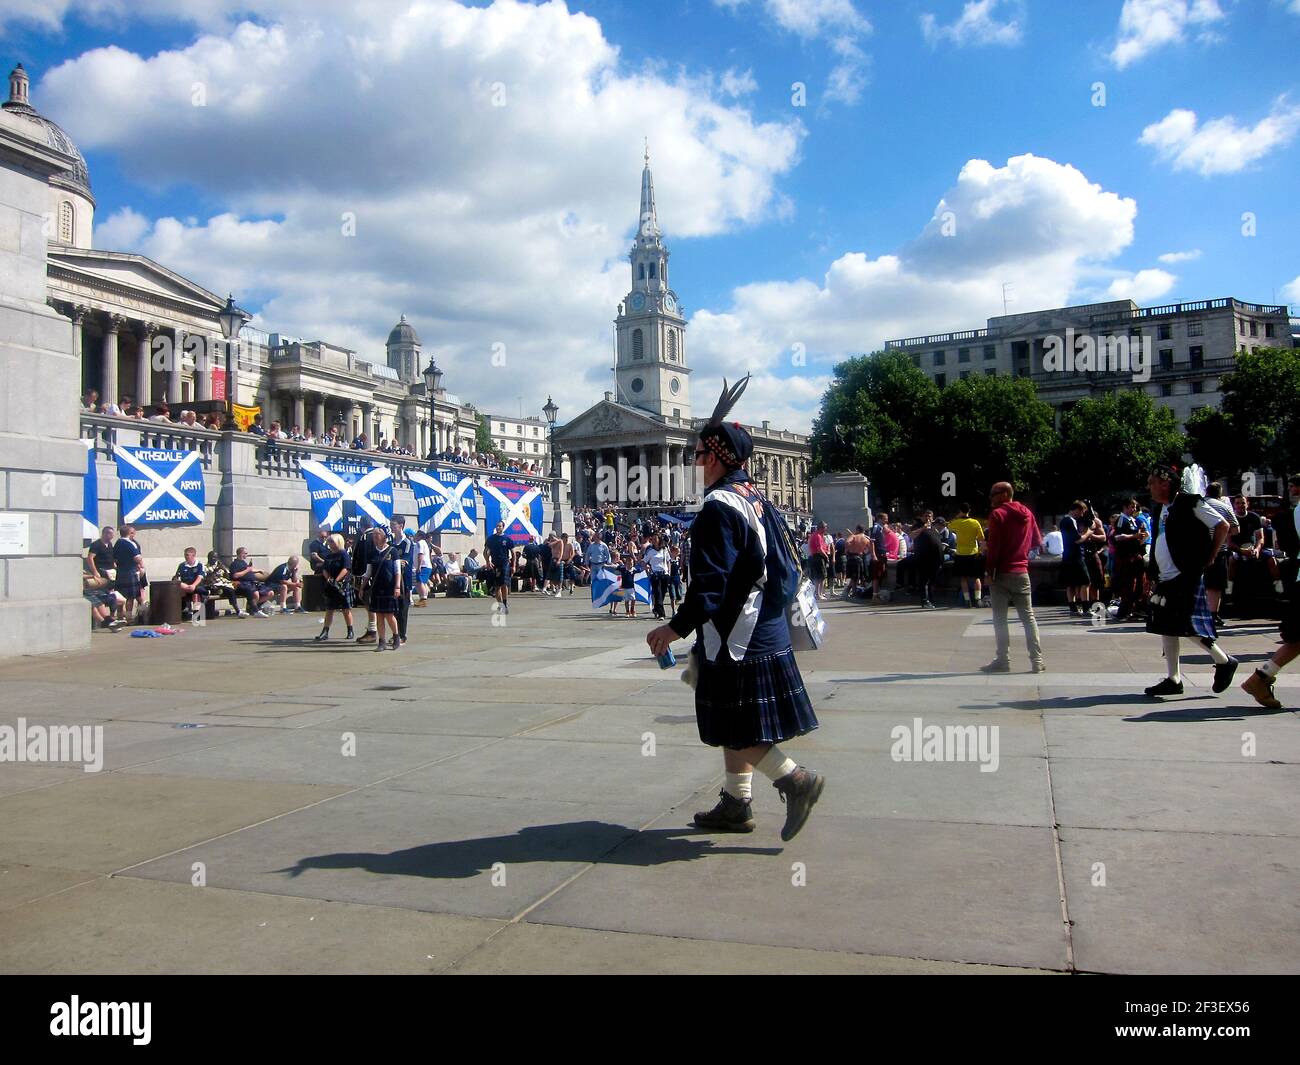 Scotland Supporters, Londres, Angleterre, Royaume-Uni Banque D'Images